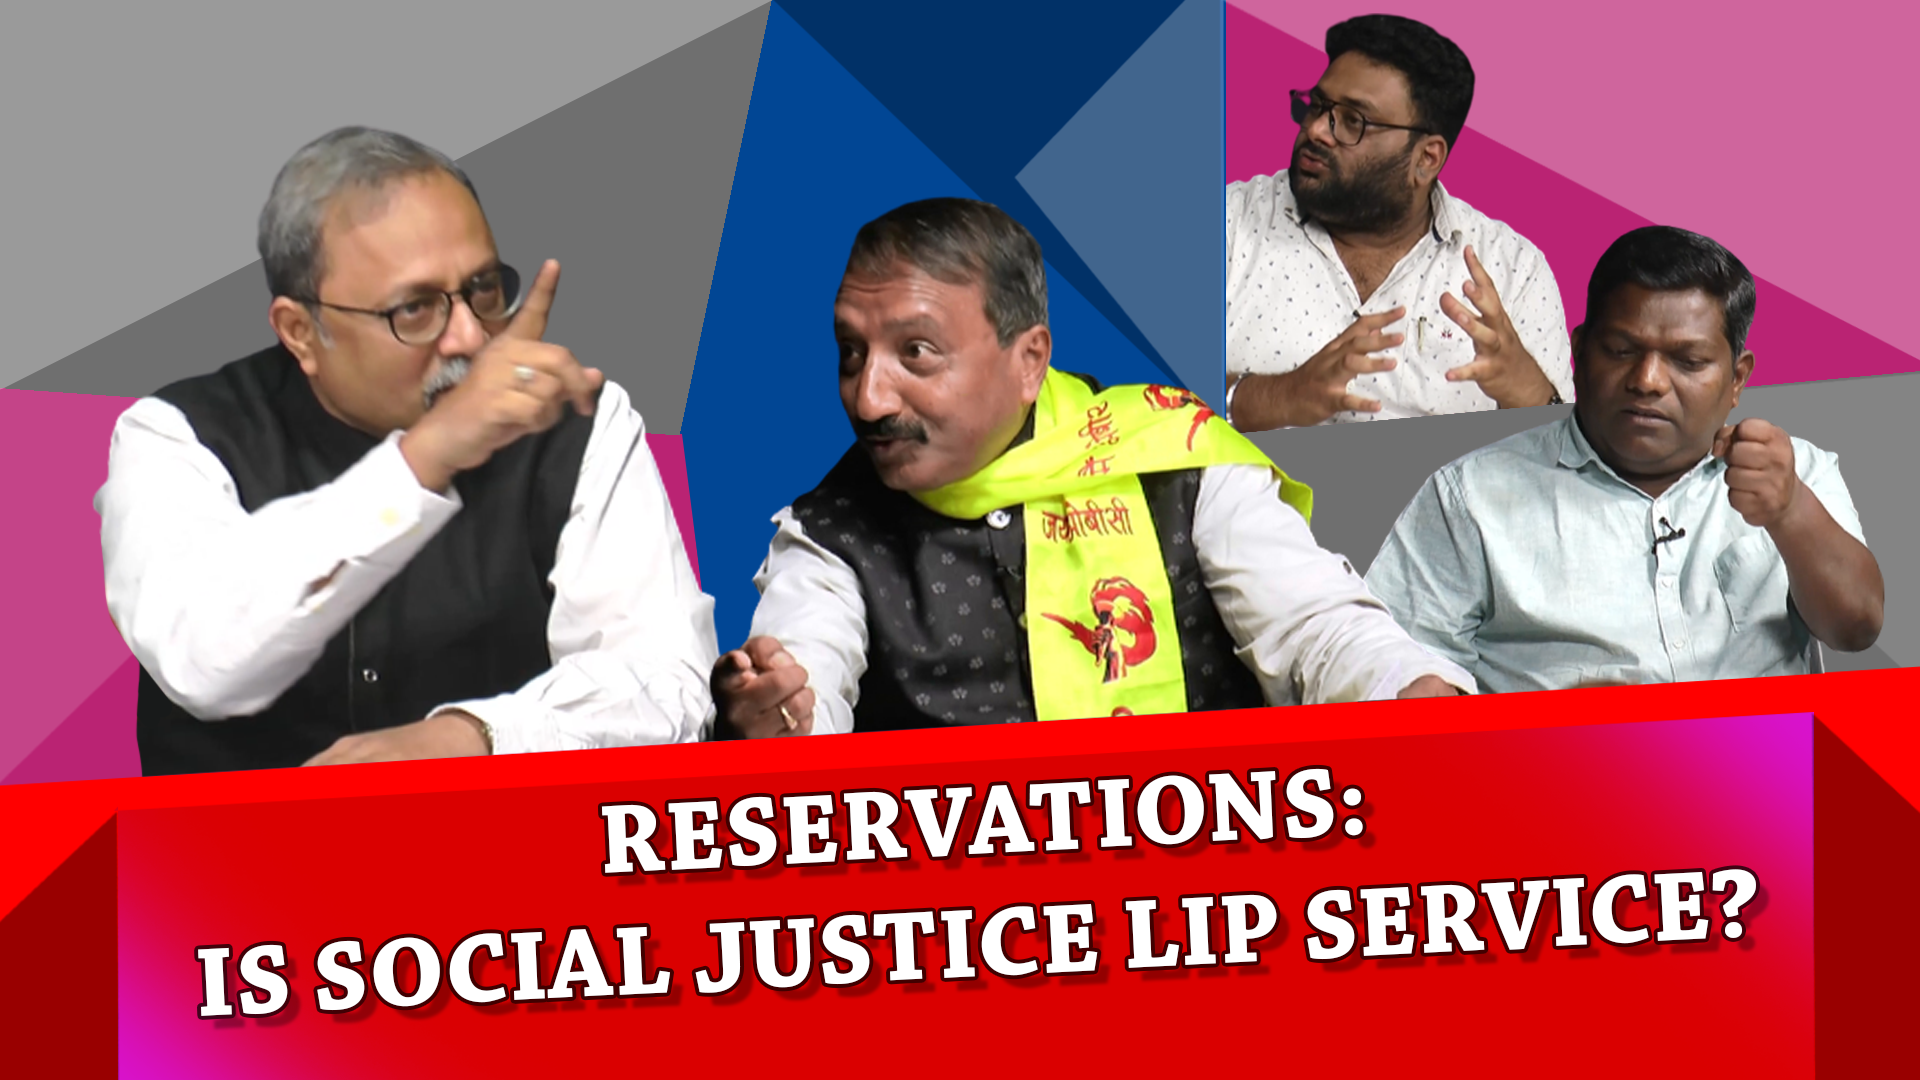 RESERVATIONS: IS SOCIAL JUSTICE LIP SERVICE? PART 2